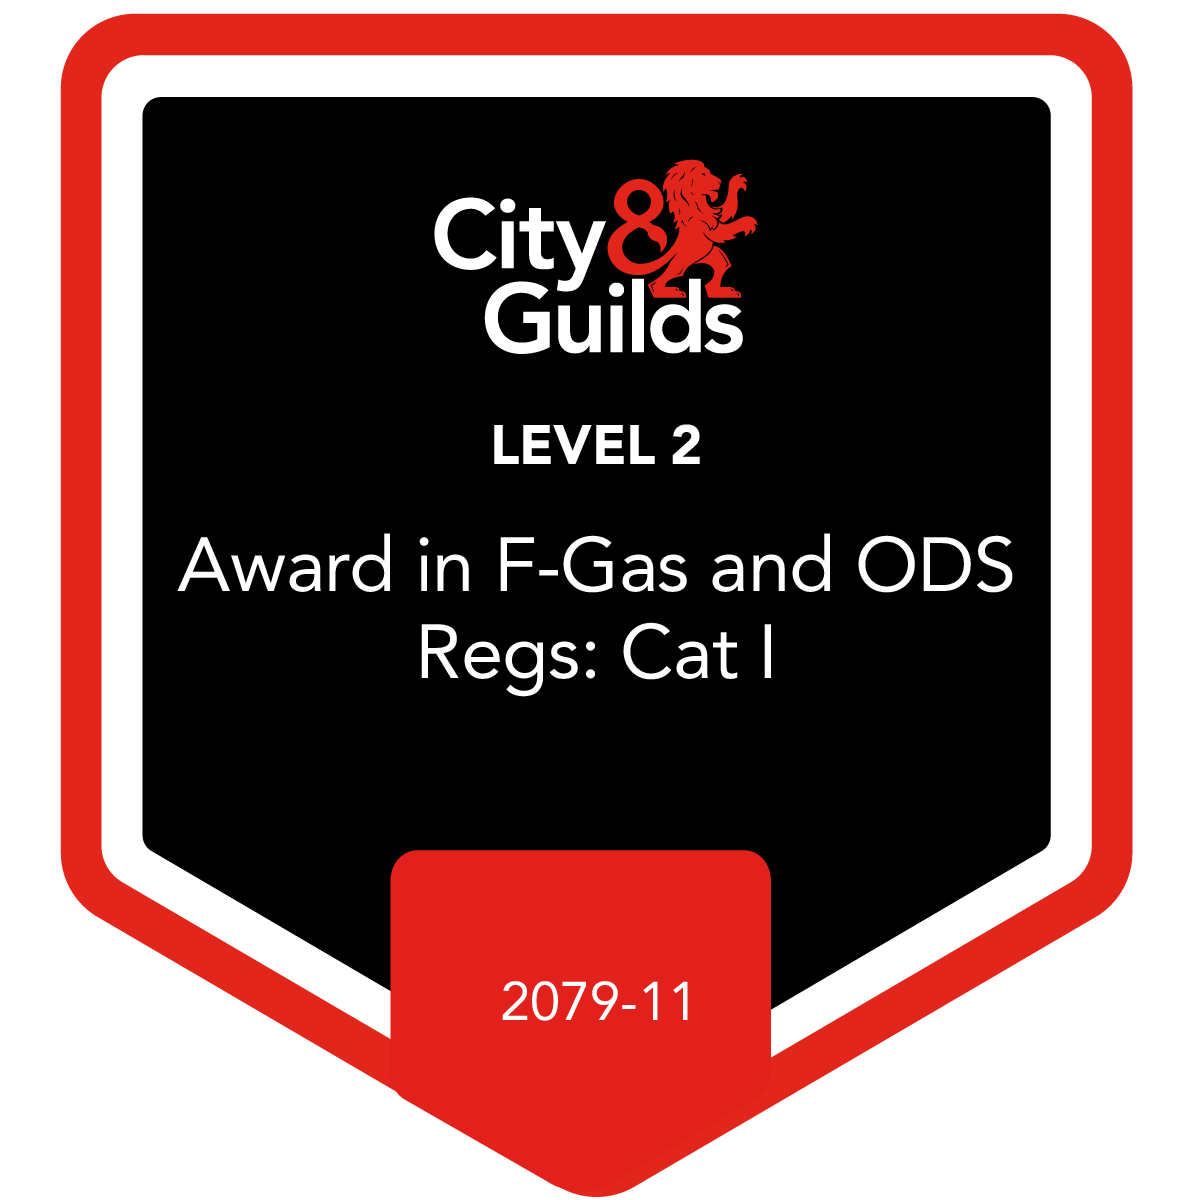 City & Guilds certified